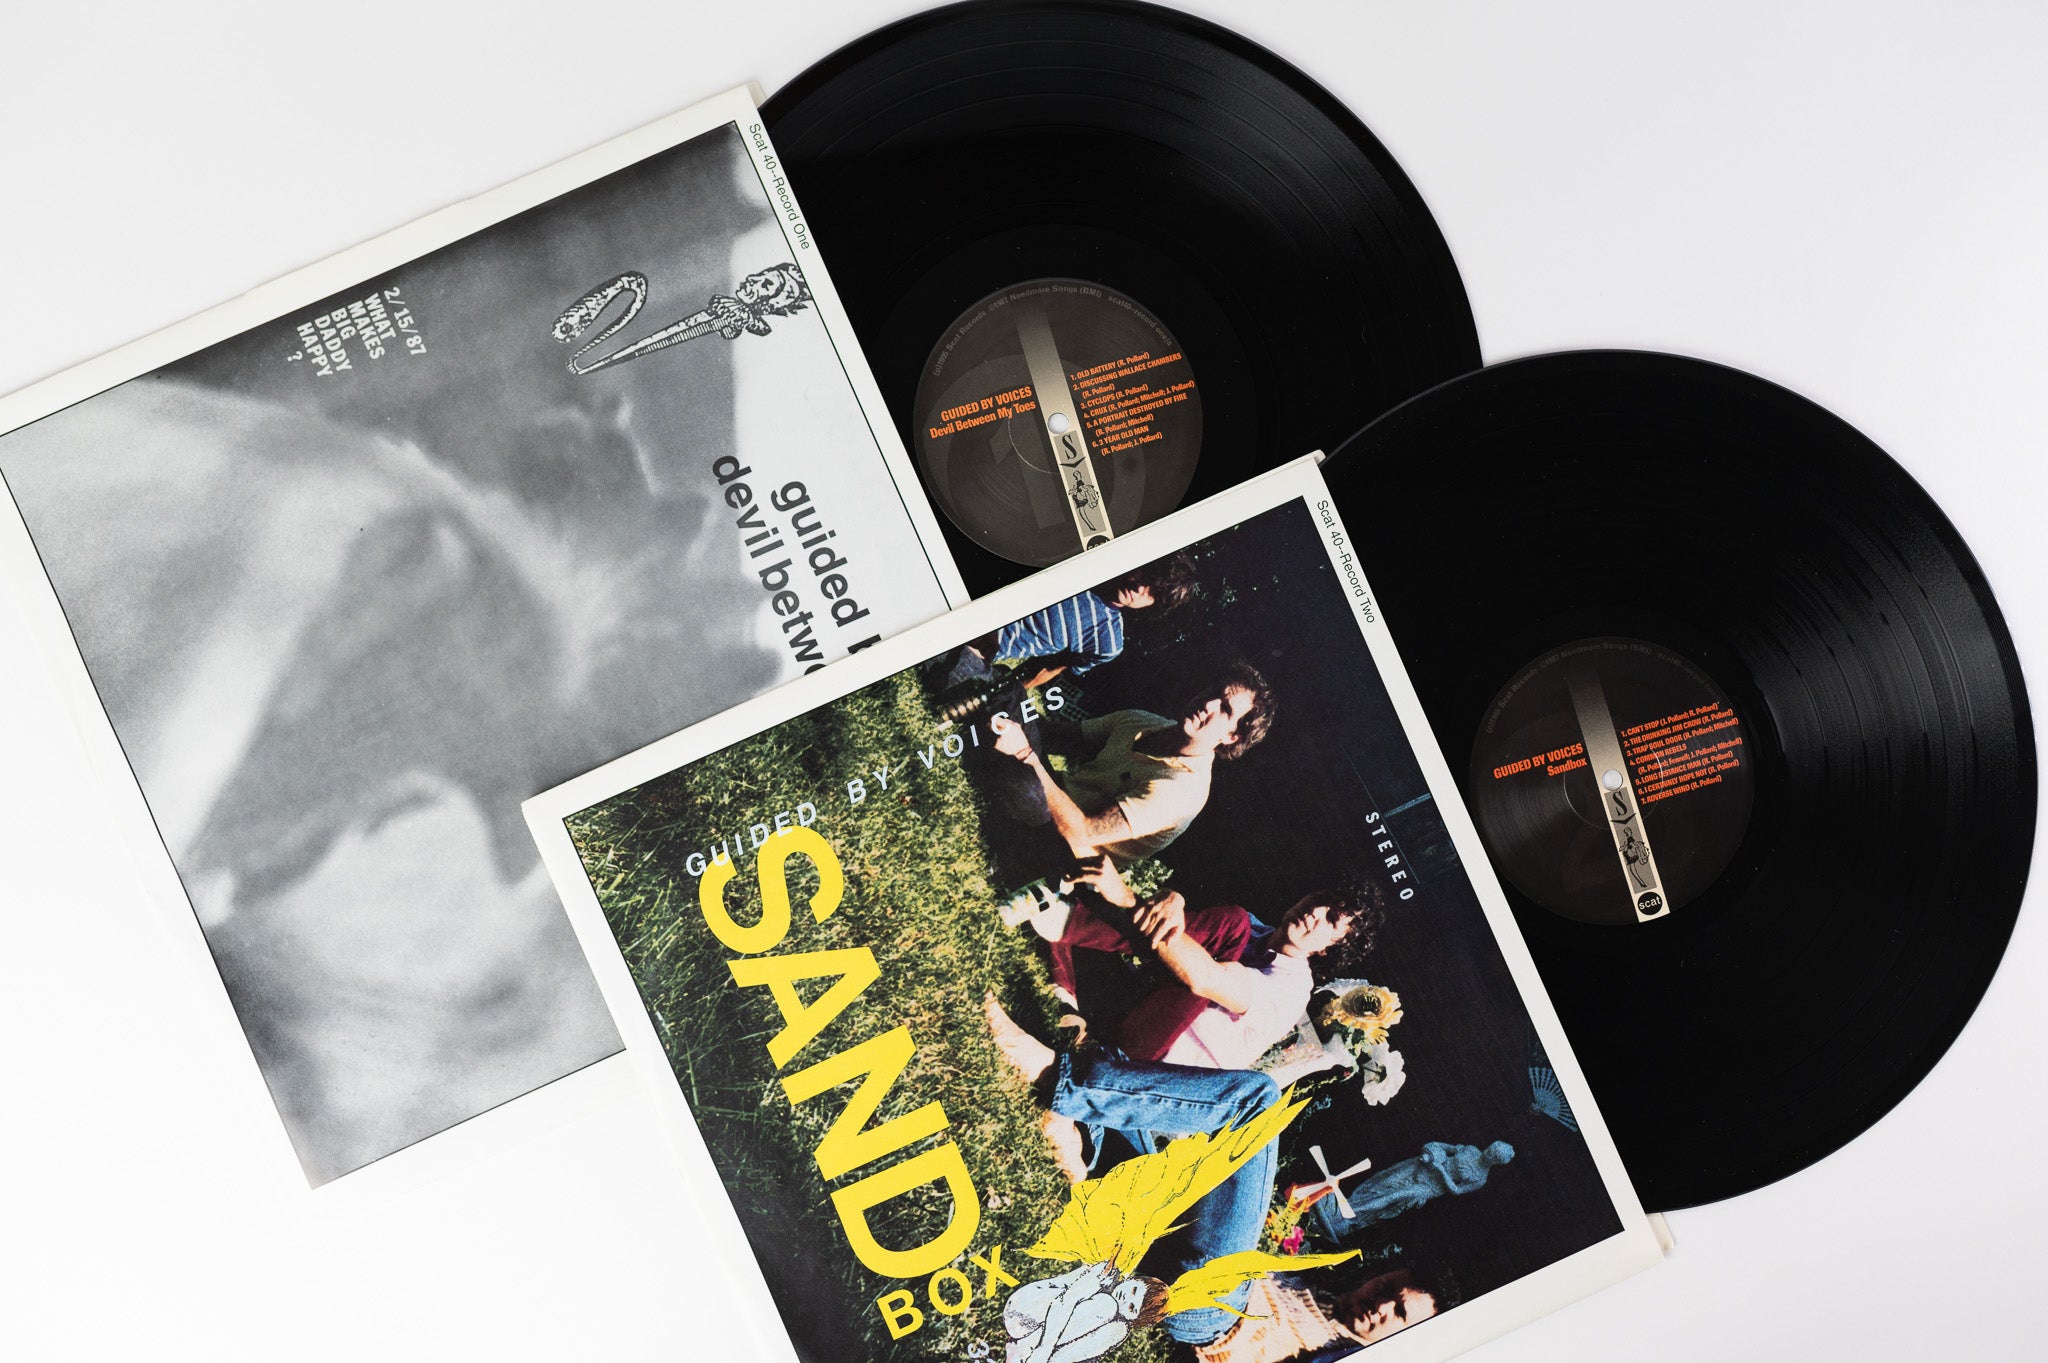 Guided By Voices - Box on Scat Box Set Reissue Black Labels